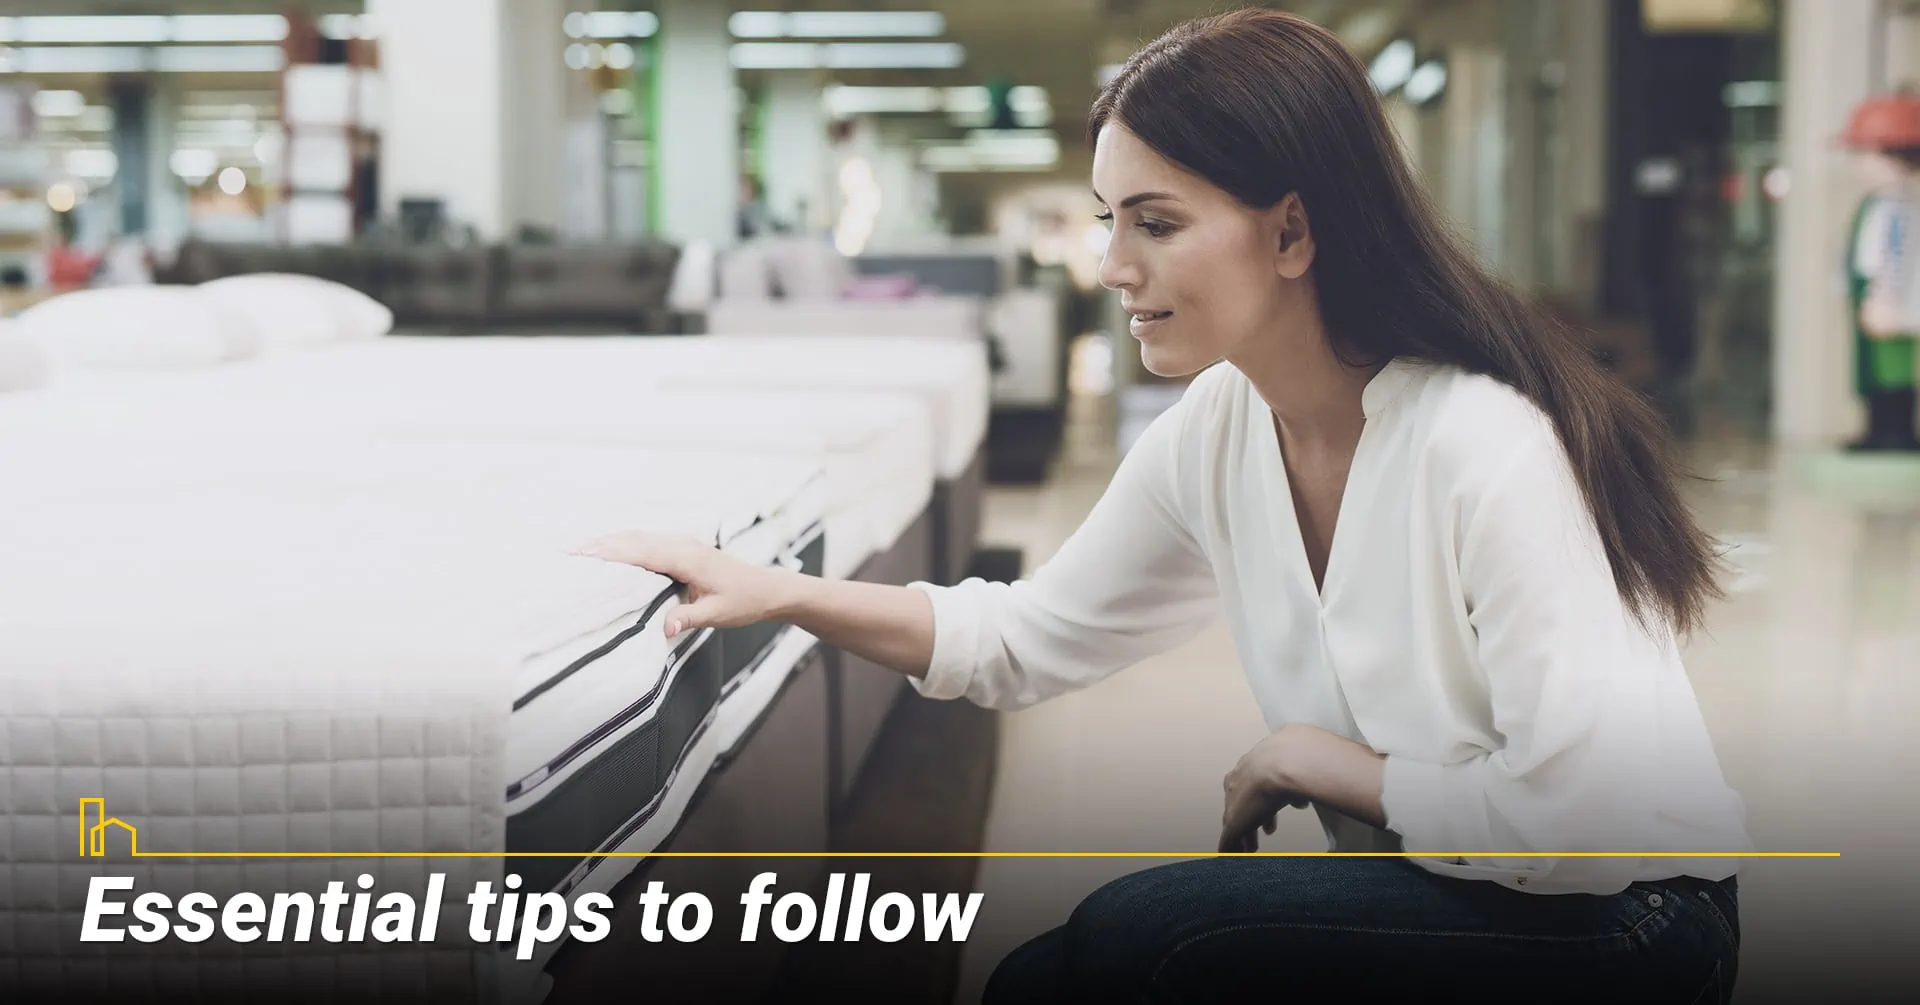 3. Essential tips to follow